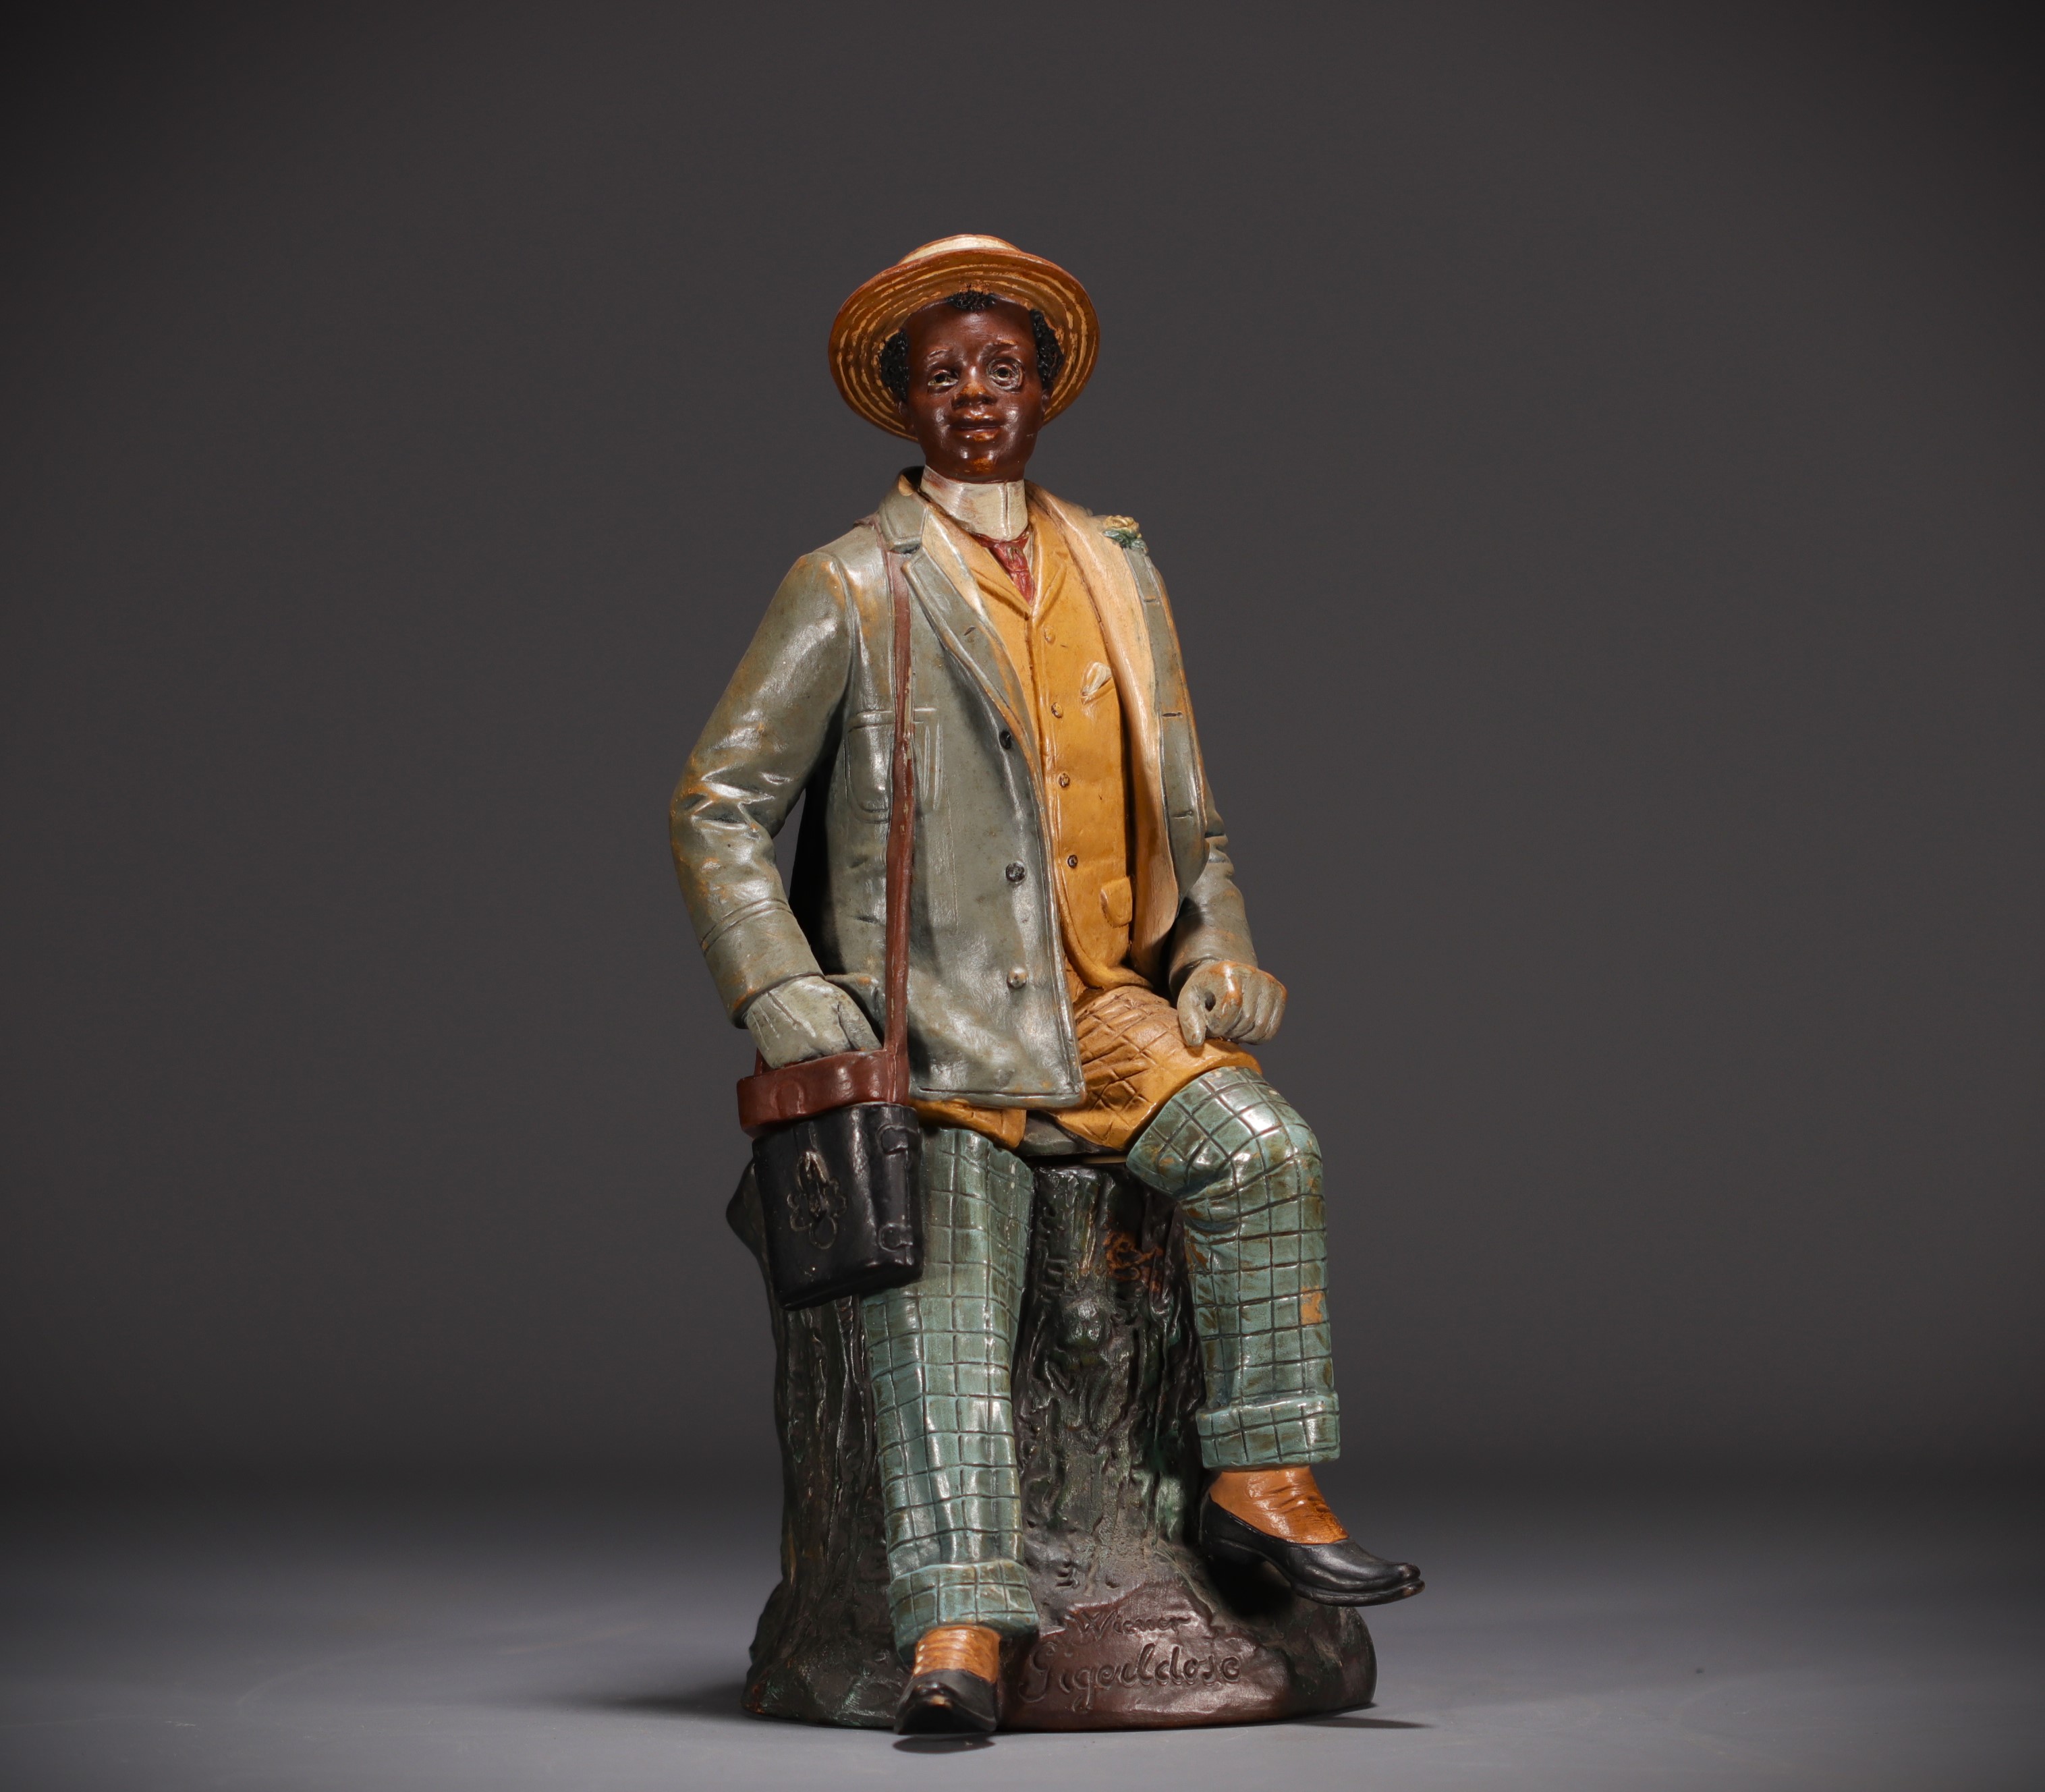 Bernard BLOCH (1836-1909) "African dandy with monocle" Polychrome terracotta tobacco pot.